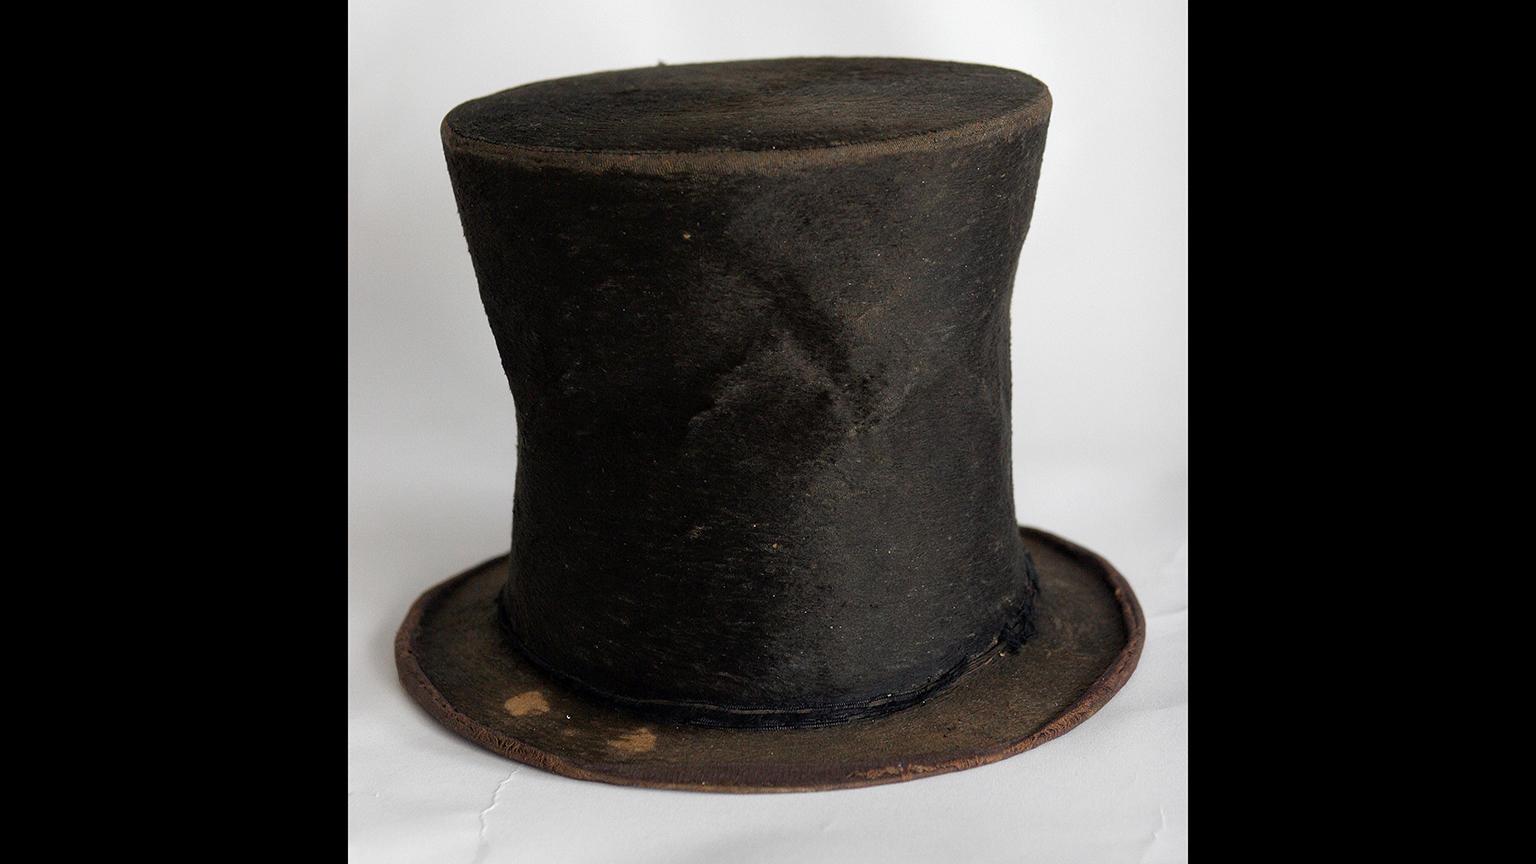 In this June 14, 2007 file photo, Abraham Lincoln’s iconic stovepipe hat is photographed at the Abraham Lincoln Presidential Library and Museum in Springfield, Ill. (AP Photo / Seth Perlman, File)